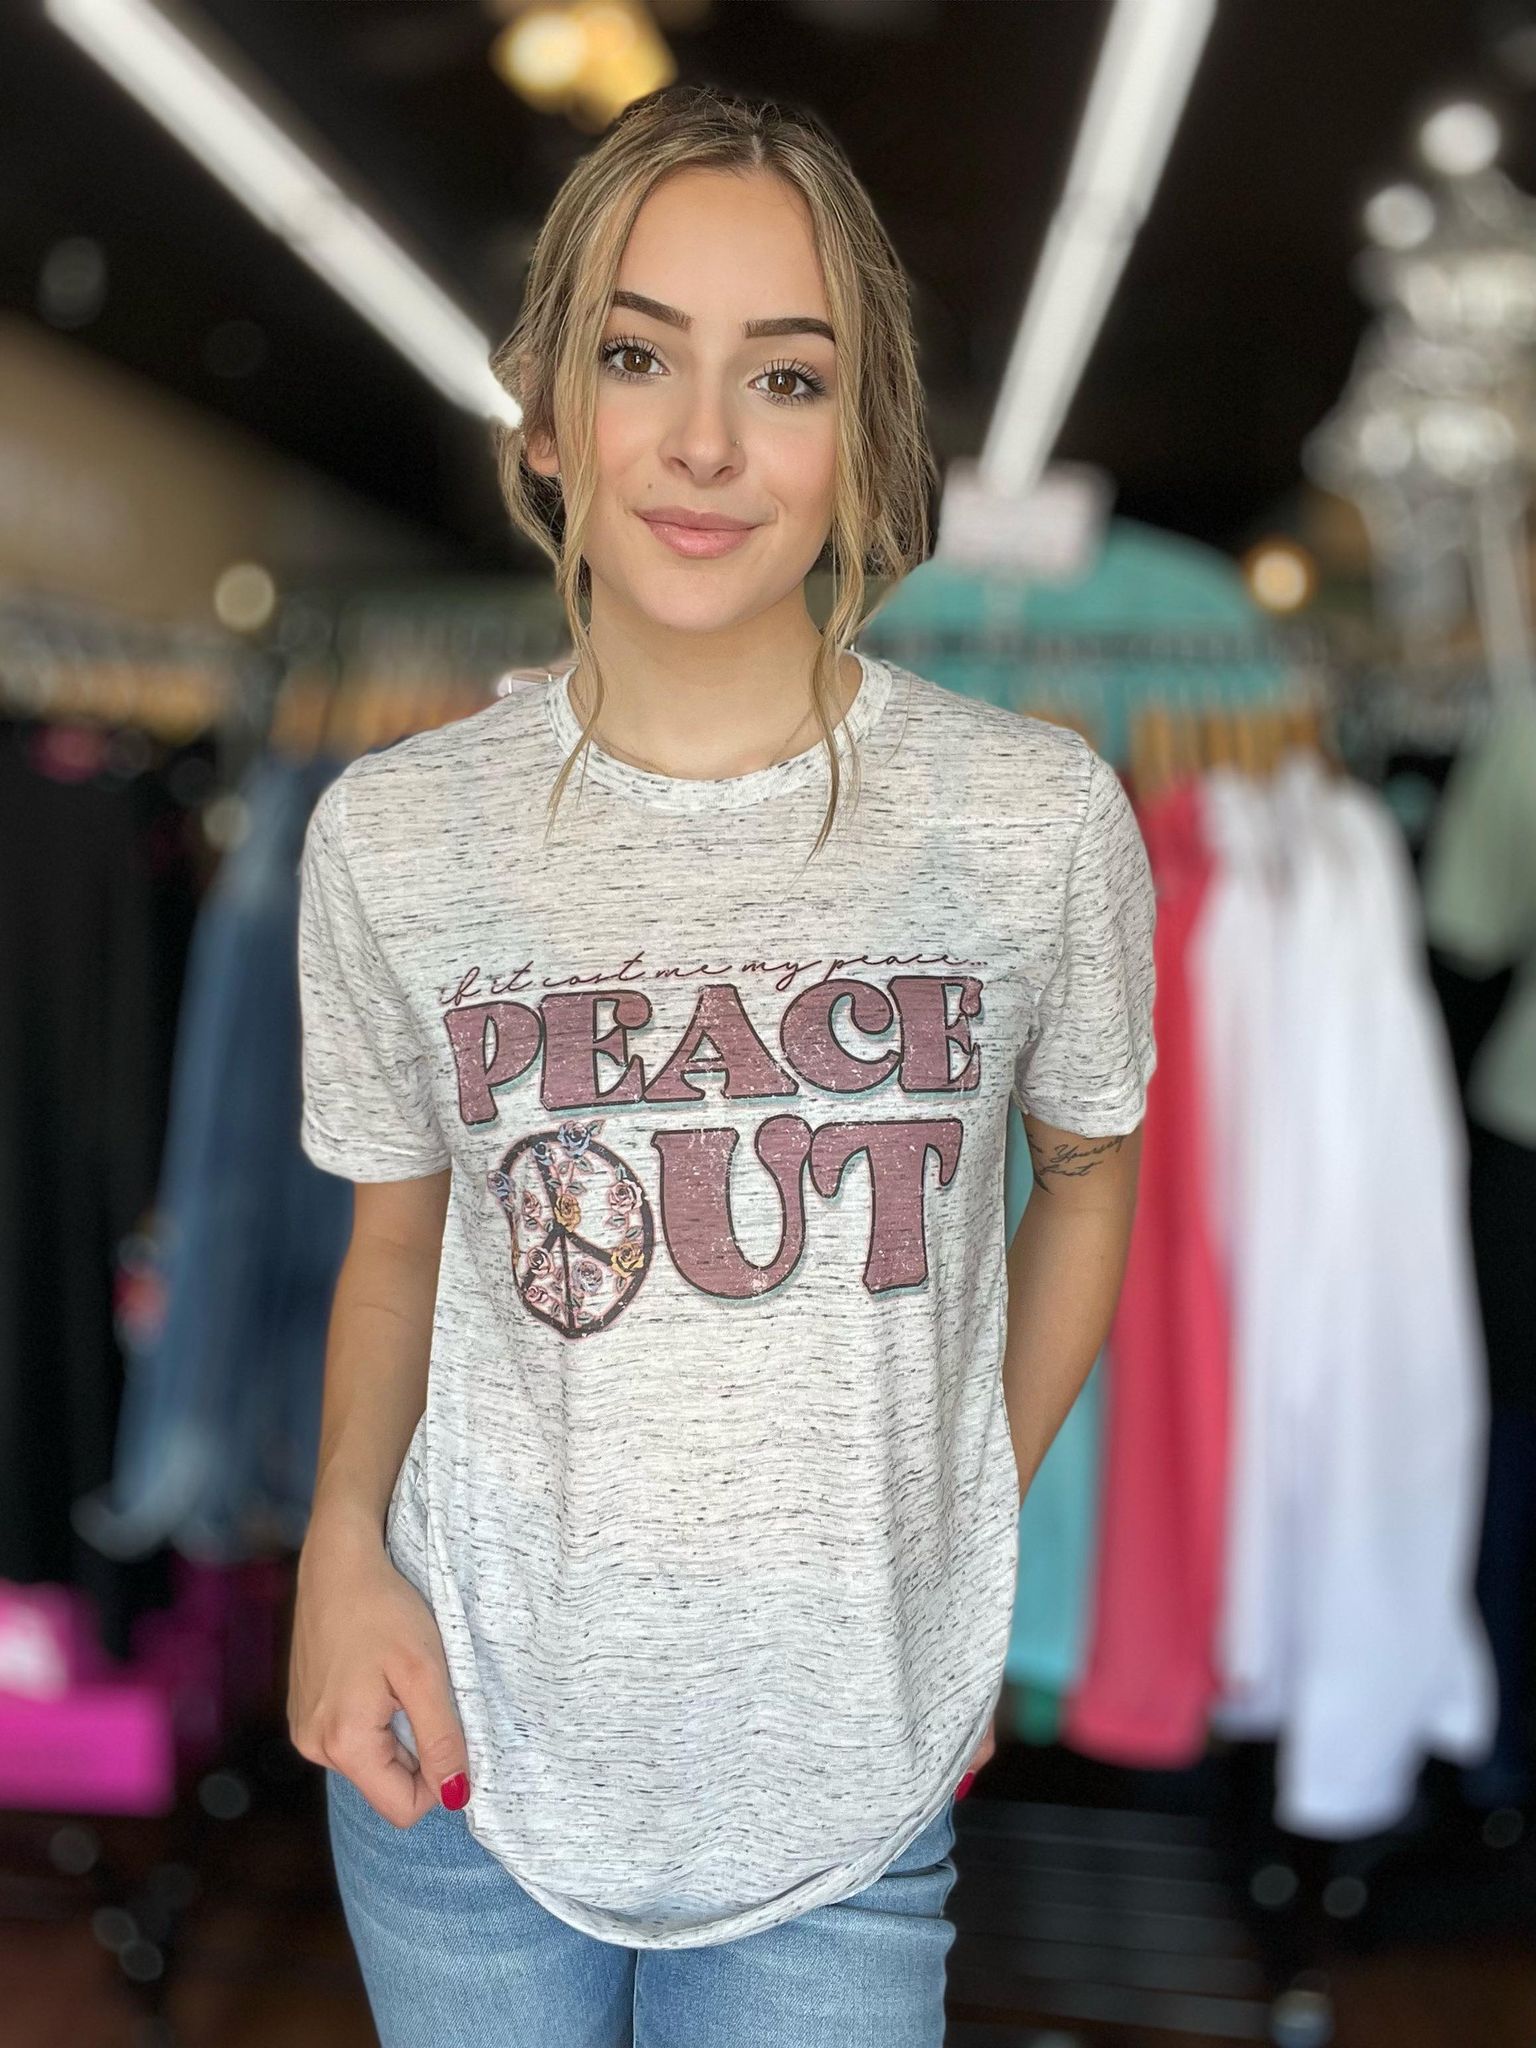 Peace Out Tee-ask apparel wholesale